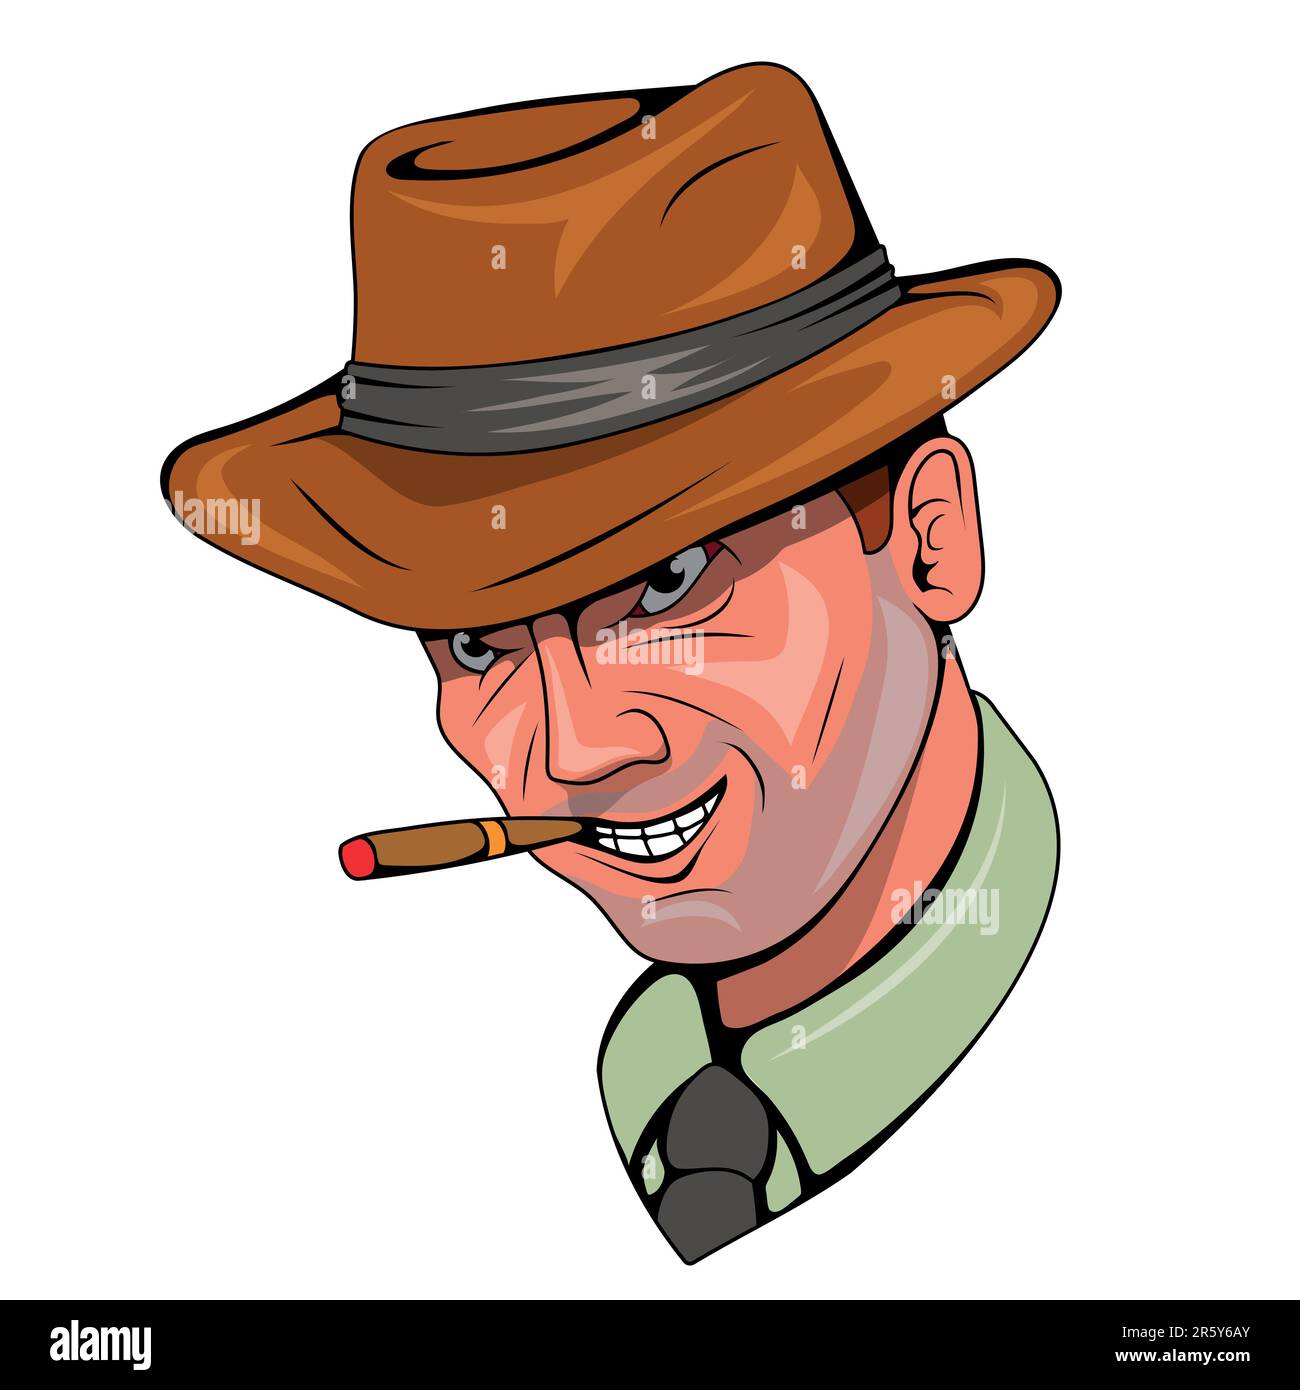 Gangster. Vector illustration of a man with hat and cigar chicago gangster mafia. Brutal malware Stock Vector